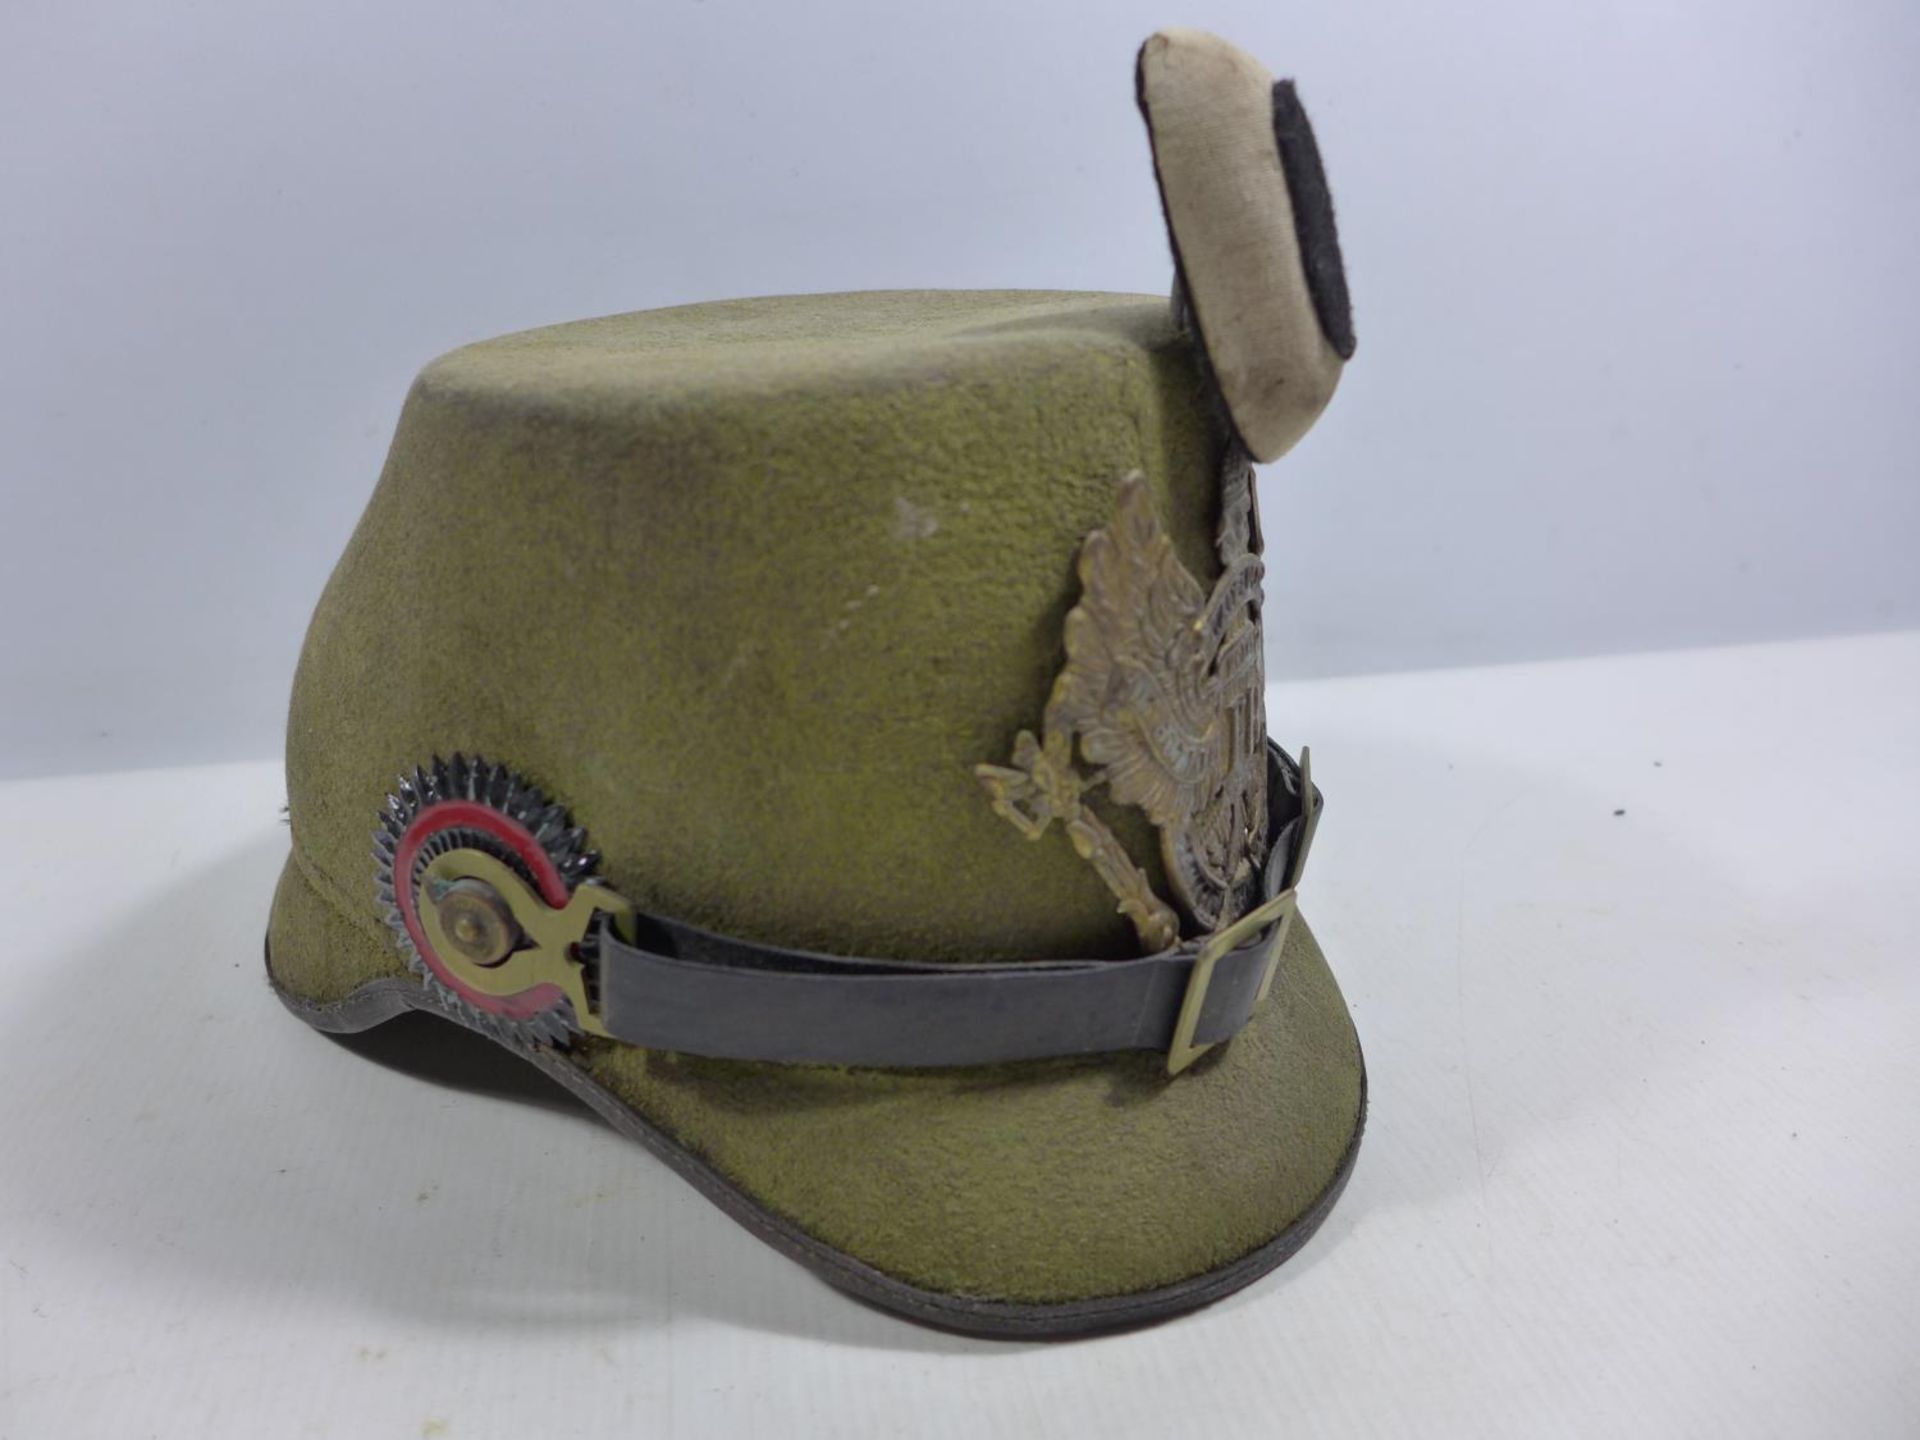 A REPLICA IMPERIAL GERMAN HELMET WITH LEATHER LINING - Image 2 of 4